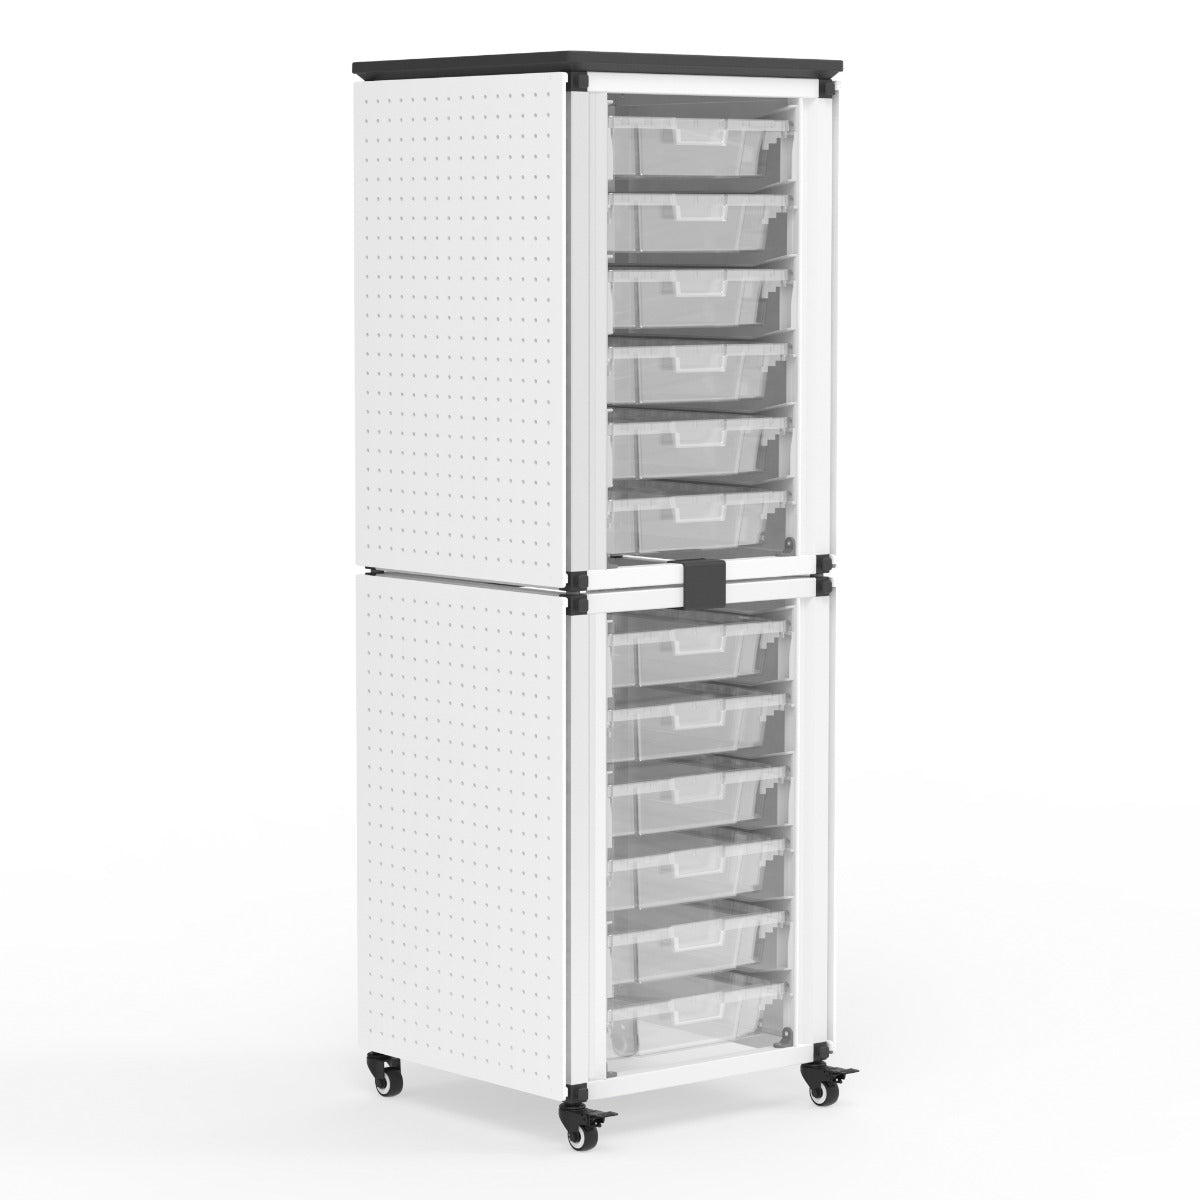 Luxor Modular Classroom Storage Cabinet - 2 stacked modules with 12 small bins (LUX-MBS-STR-12-12S) - SchoolOutlet